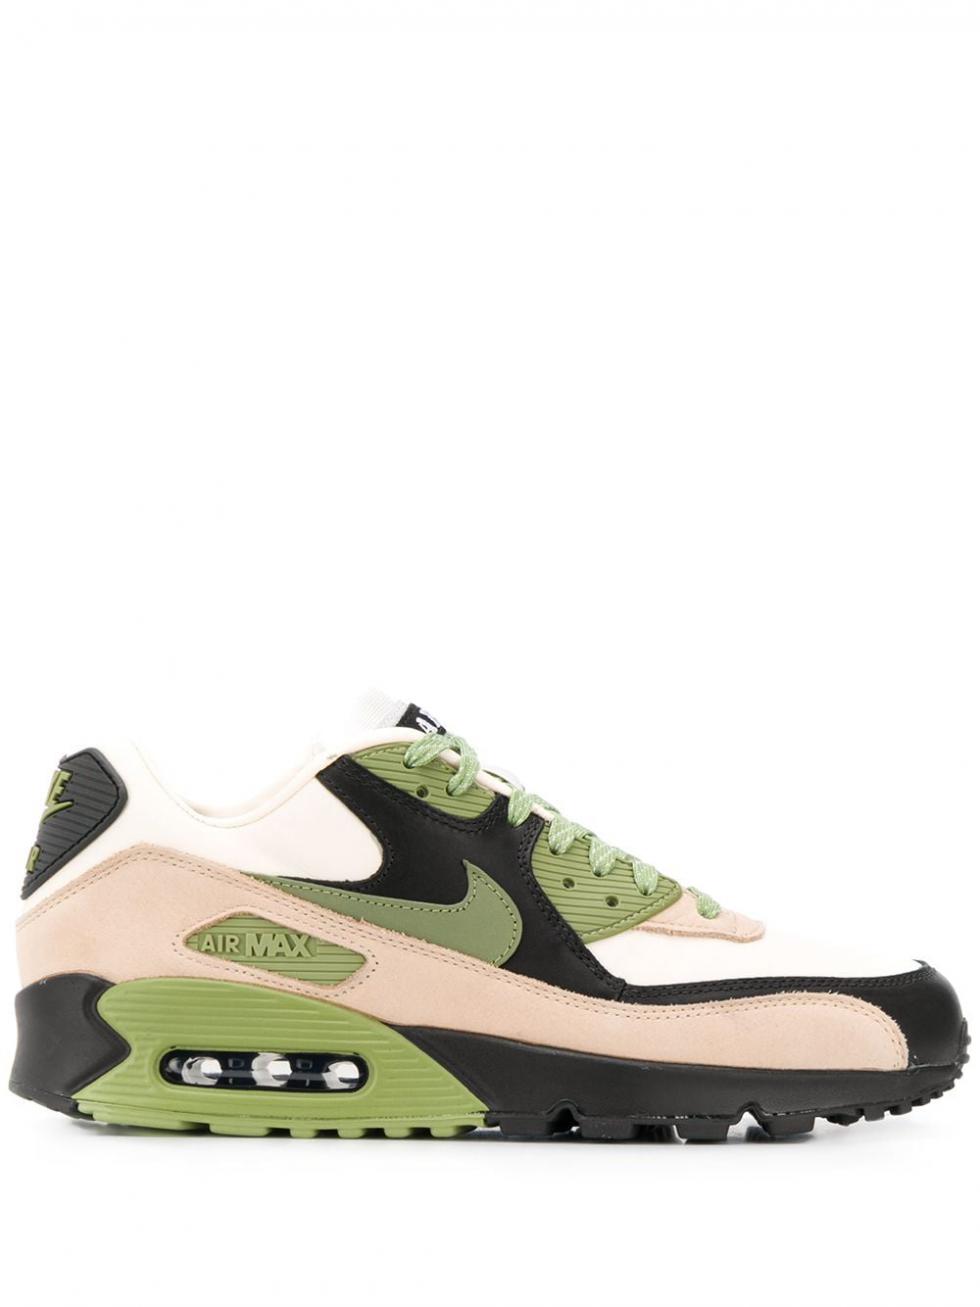 Homme Baskets Air Max 90 Light Cream/Alligator-Pale Ivo | Baskets Nike - Angelic Claws